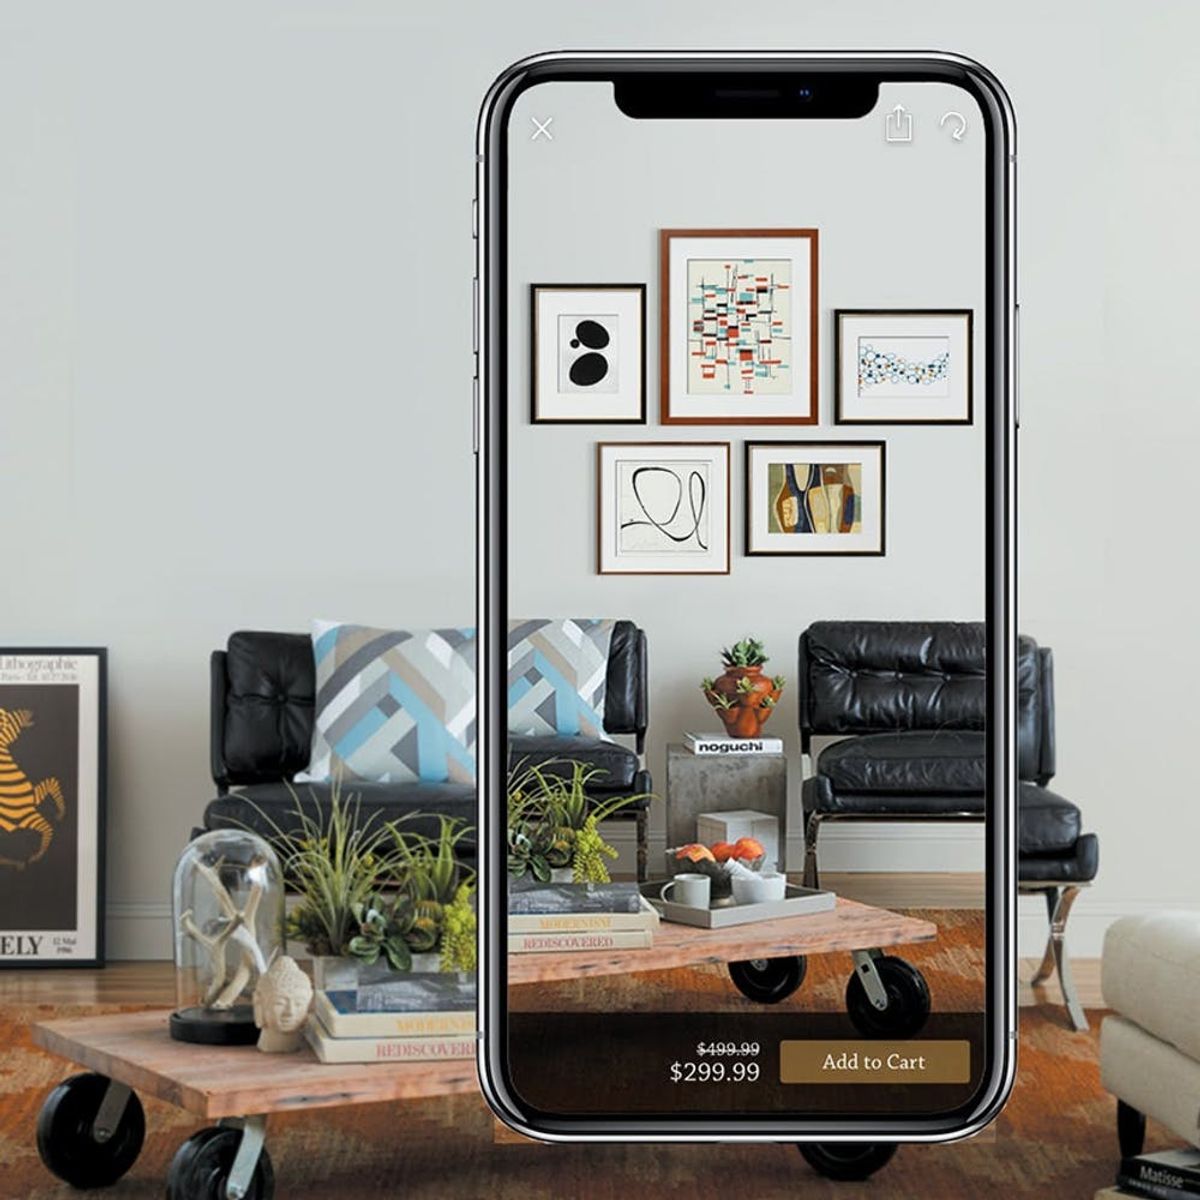 Art.com’s New Features Are the Future of Home Design